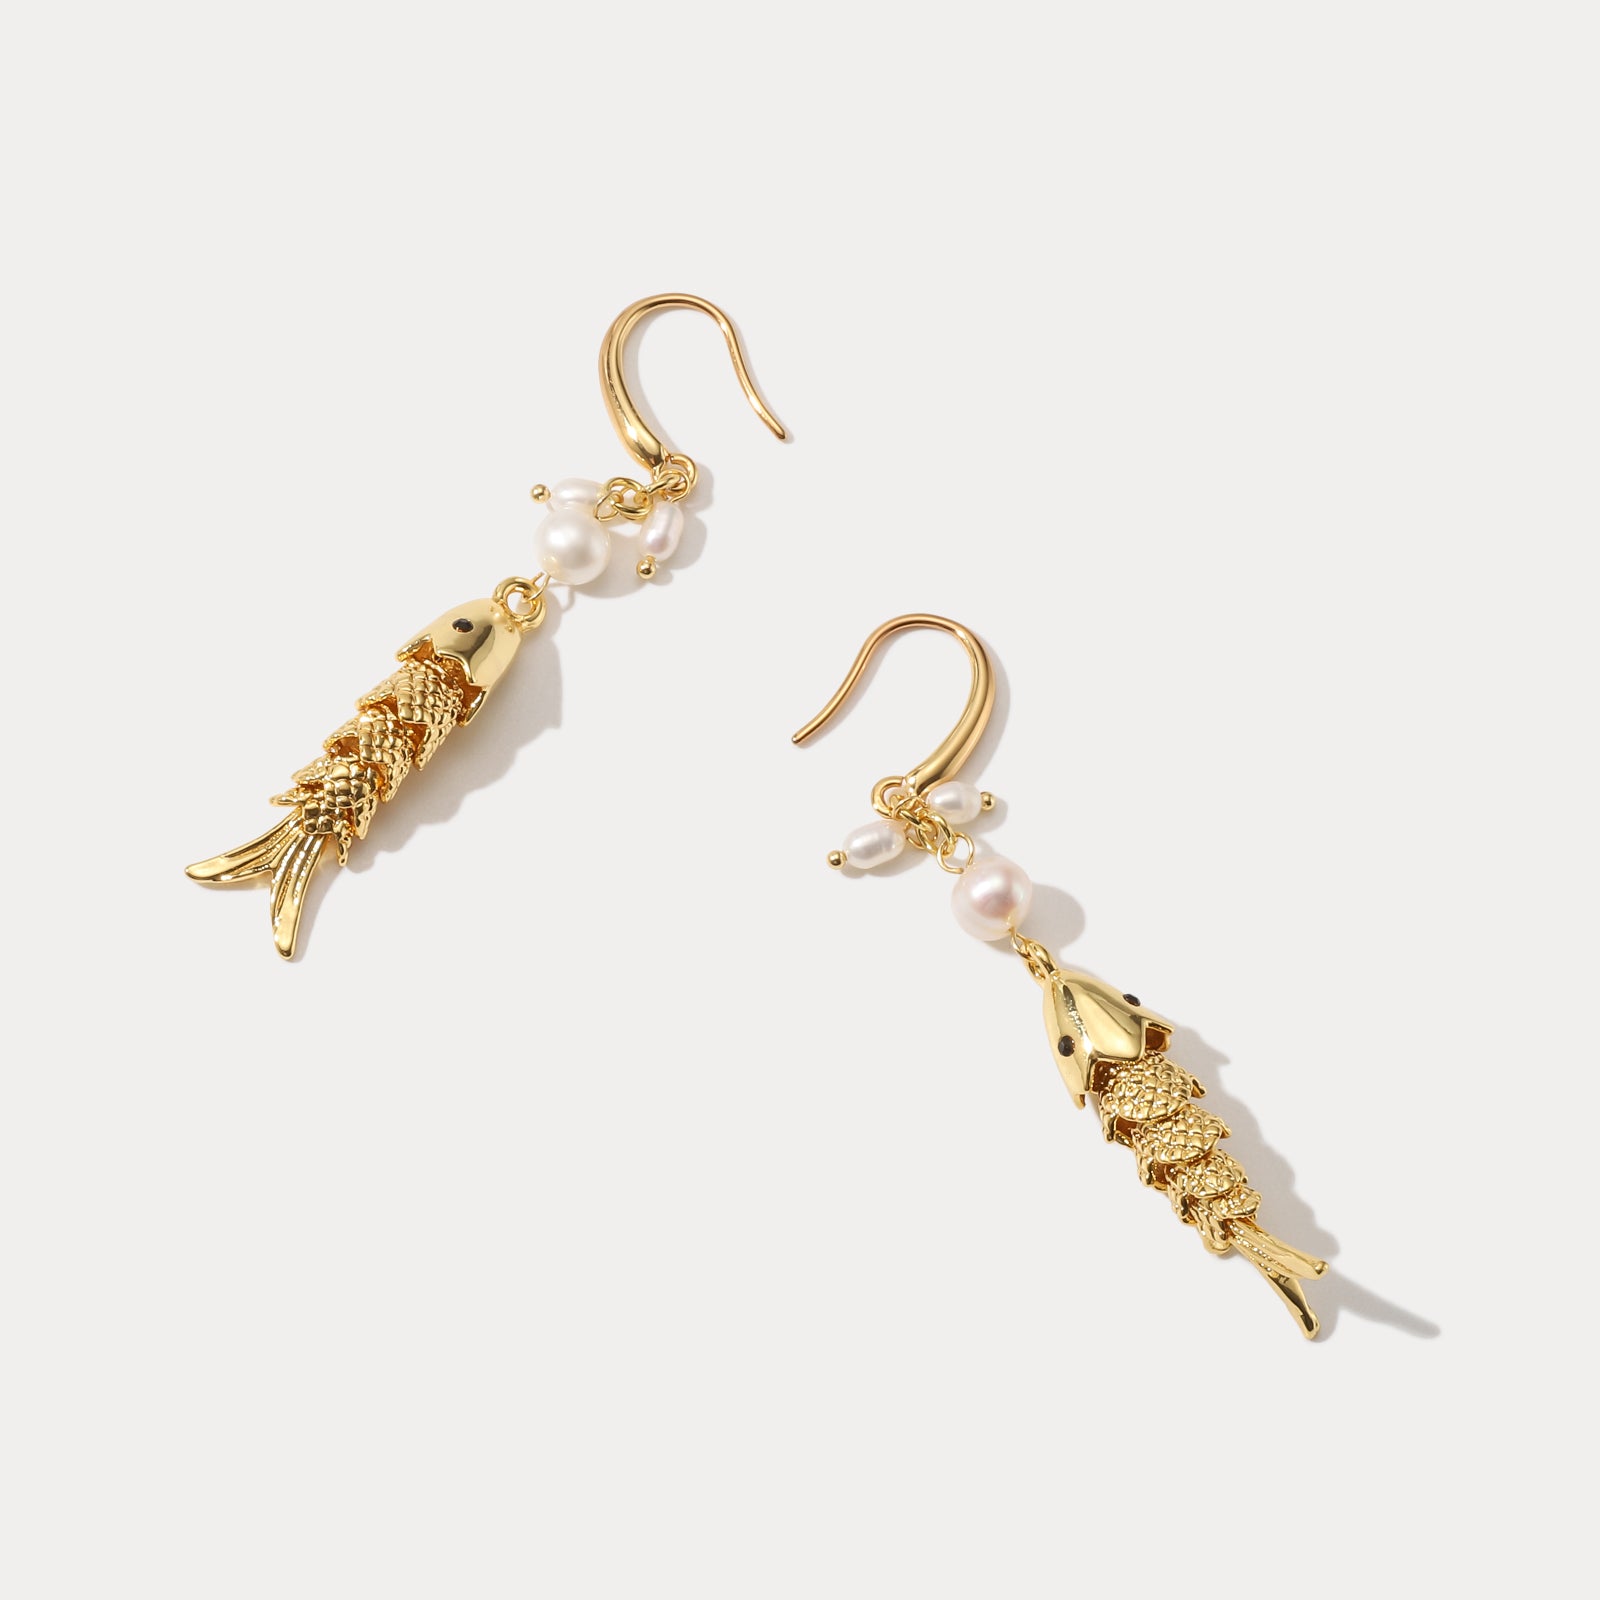 Koi Pearl Earrings Birthday Jewelry Gifts for Woman